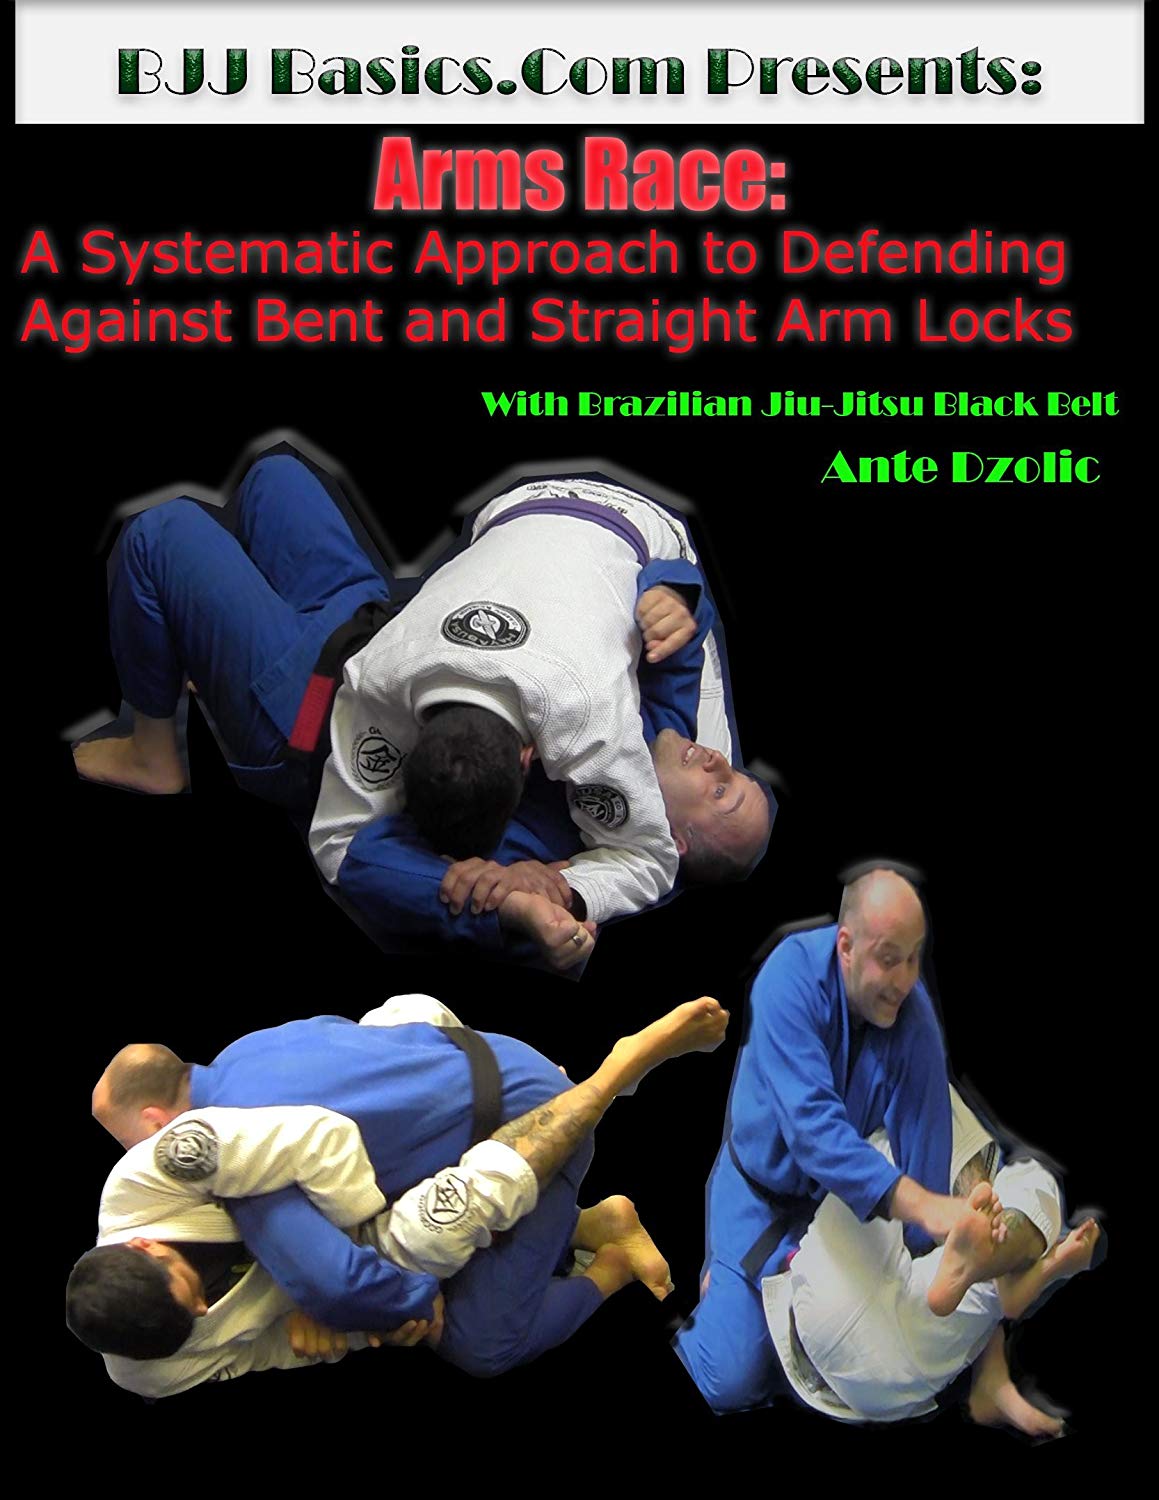 Arms Race DVD: A systematic approach to defending against bent and straight arm locks with Ante Dzolic - Budovideos Inc